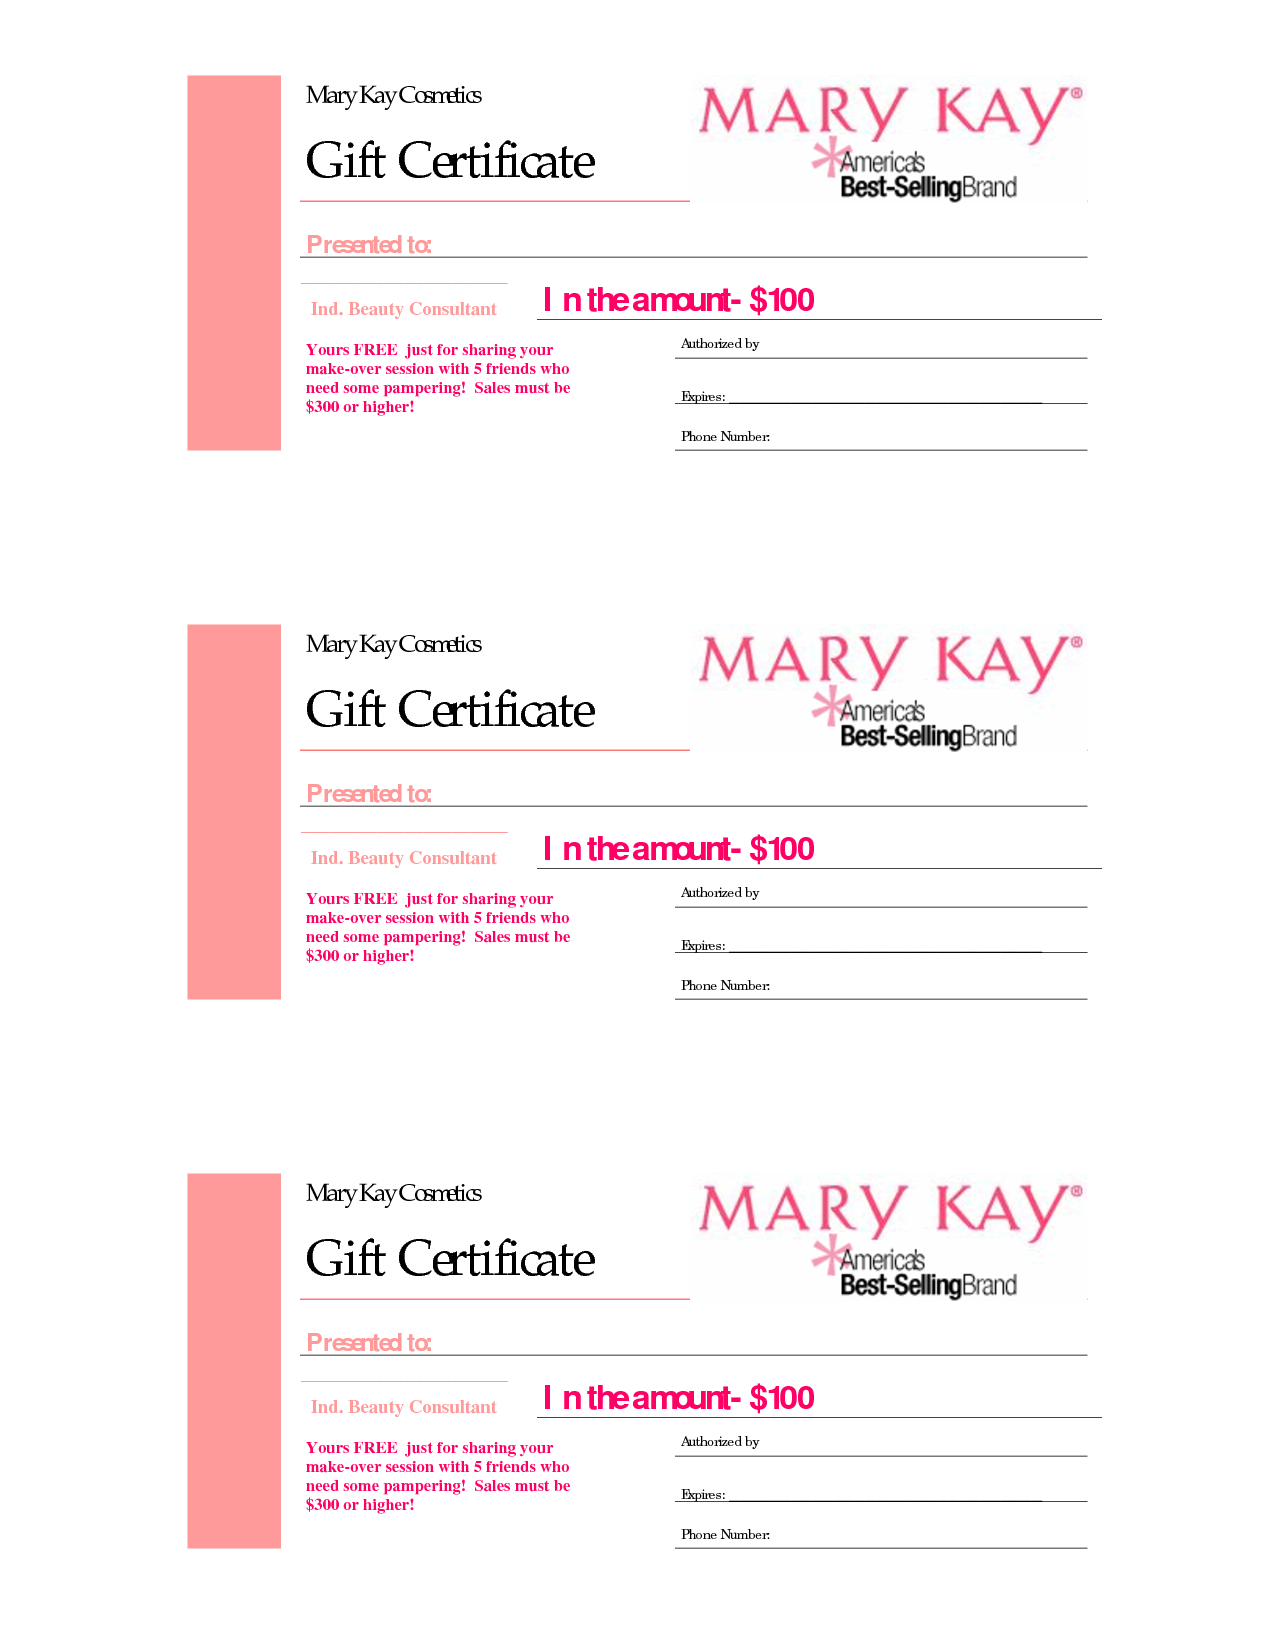 Gift Certificates | Mary Kay Gift Certificate! | Marykay Pertaining To Mary Kay Gift Certificate Template